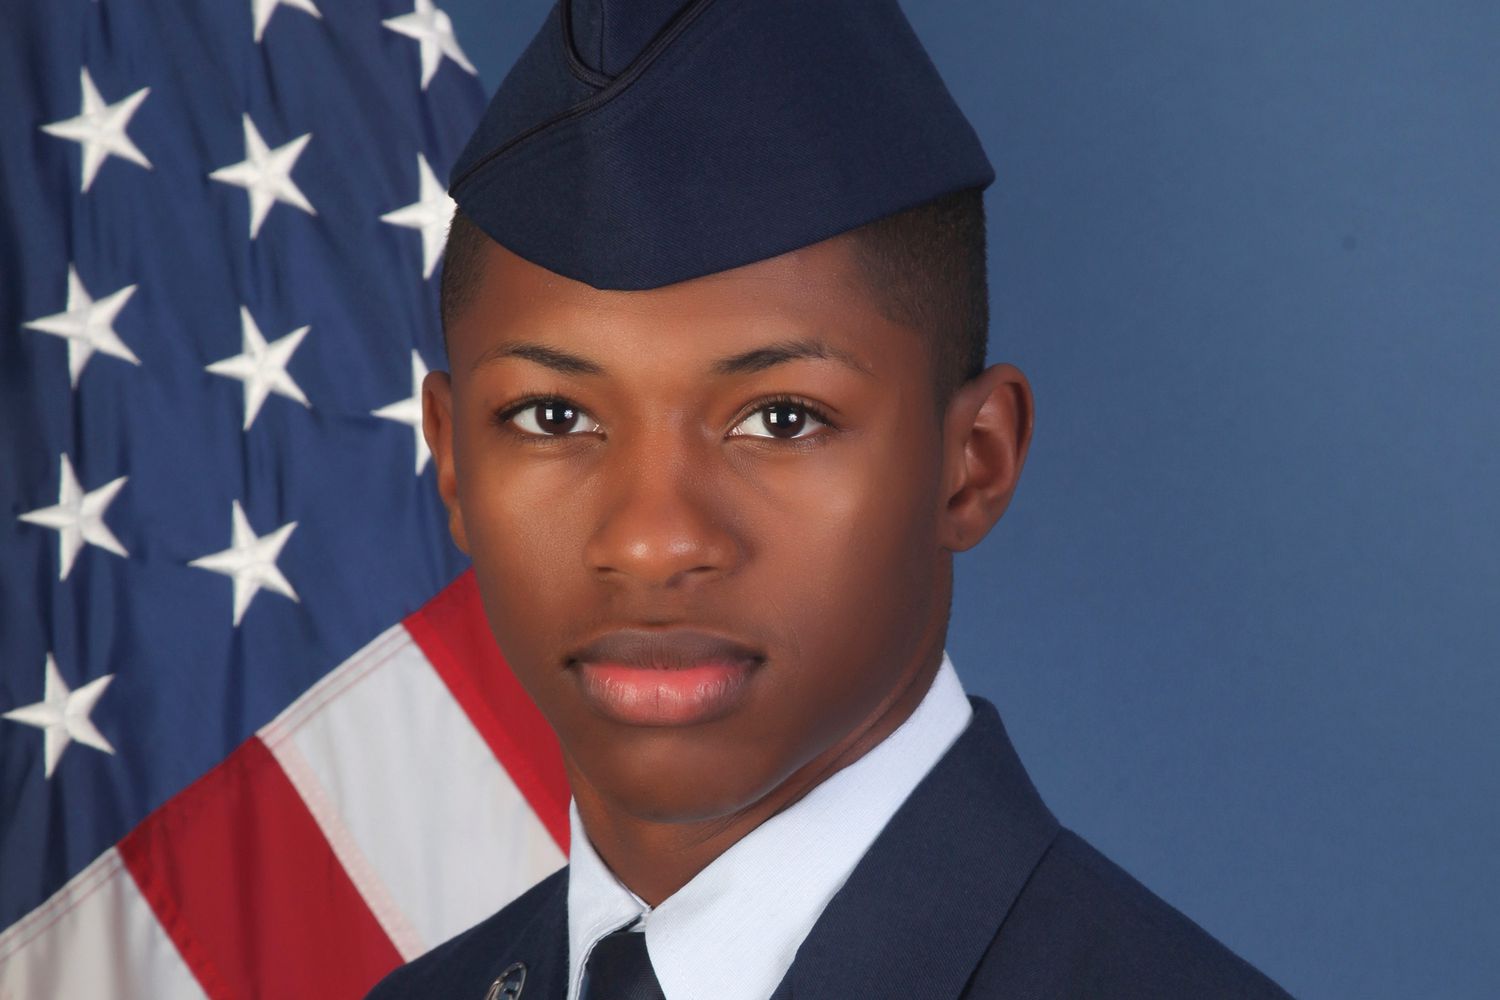 Say What Now? Florida Deputies Who Fatally Shot US Airman Burst Into Wrong Apartment, Attorney Says